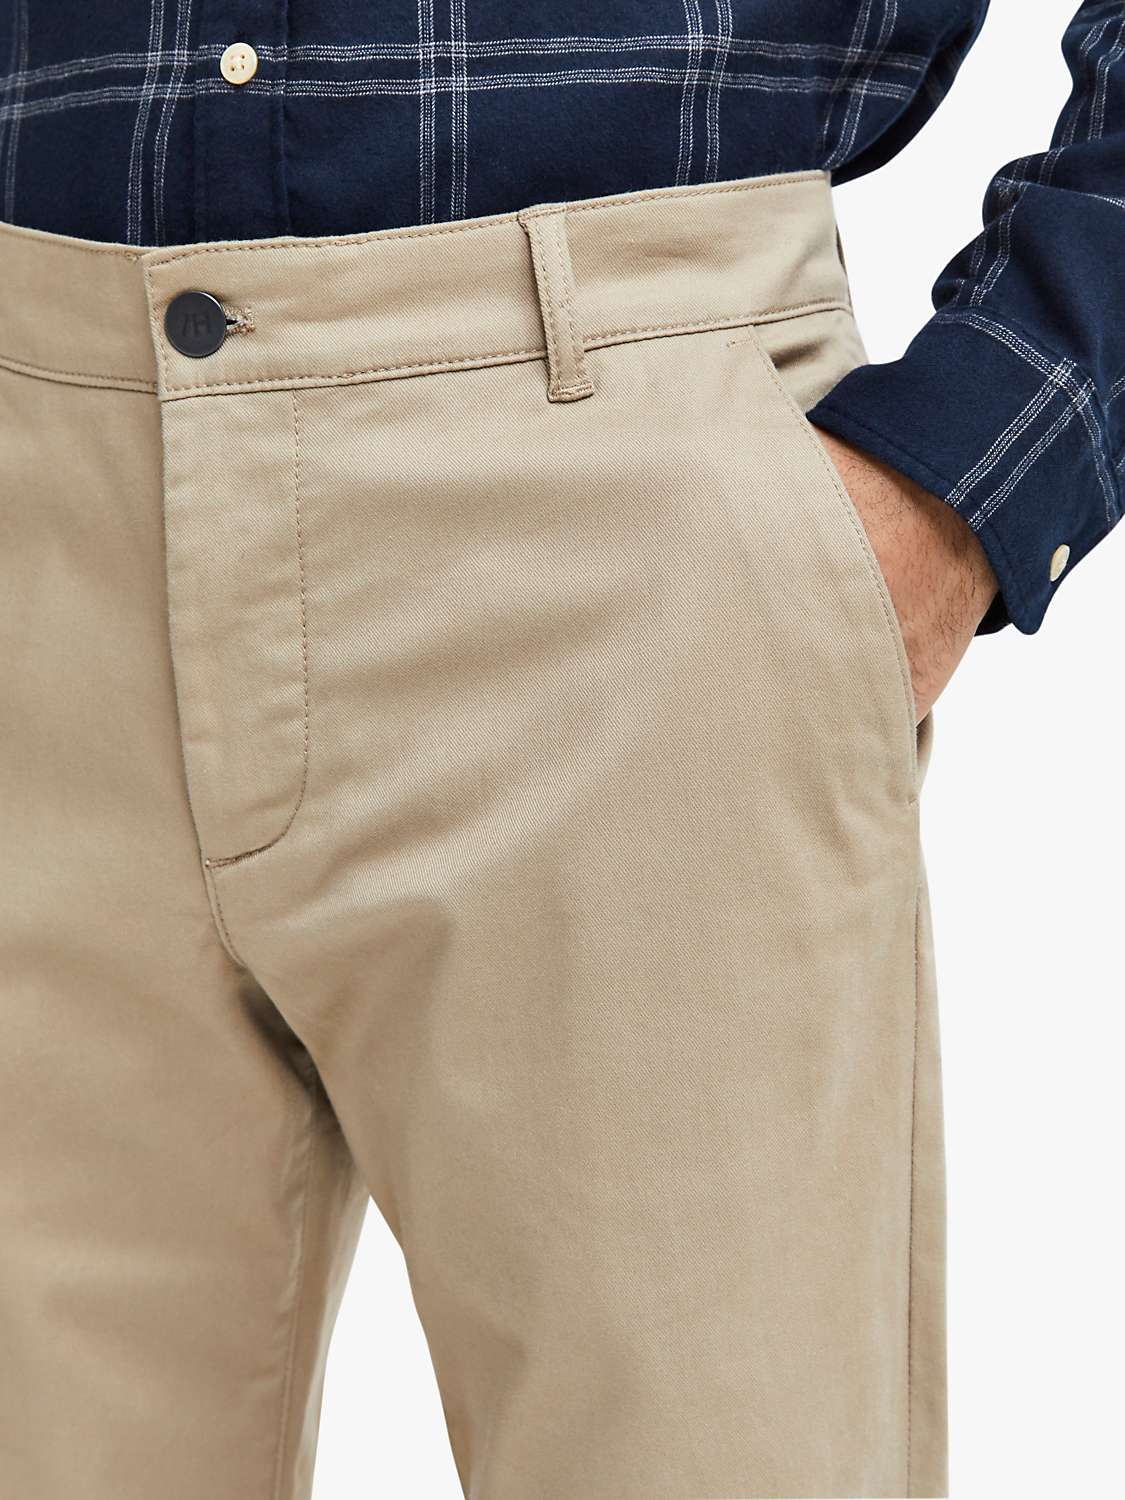 SELECTED HOMME Standard Chinos, Chinchilla at John Lewis & Partners